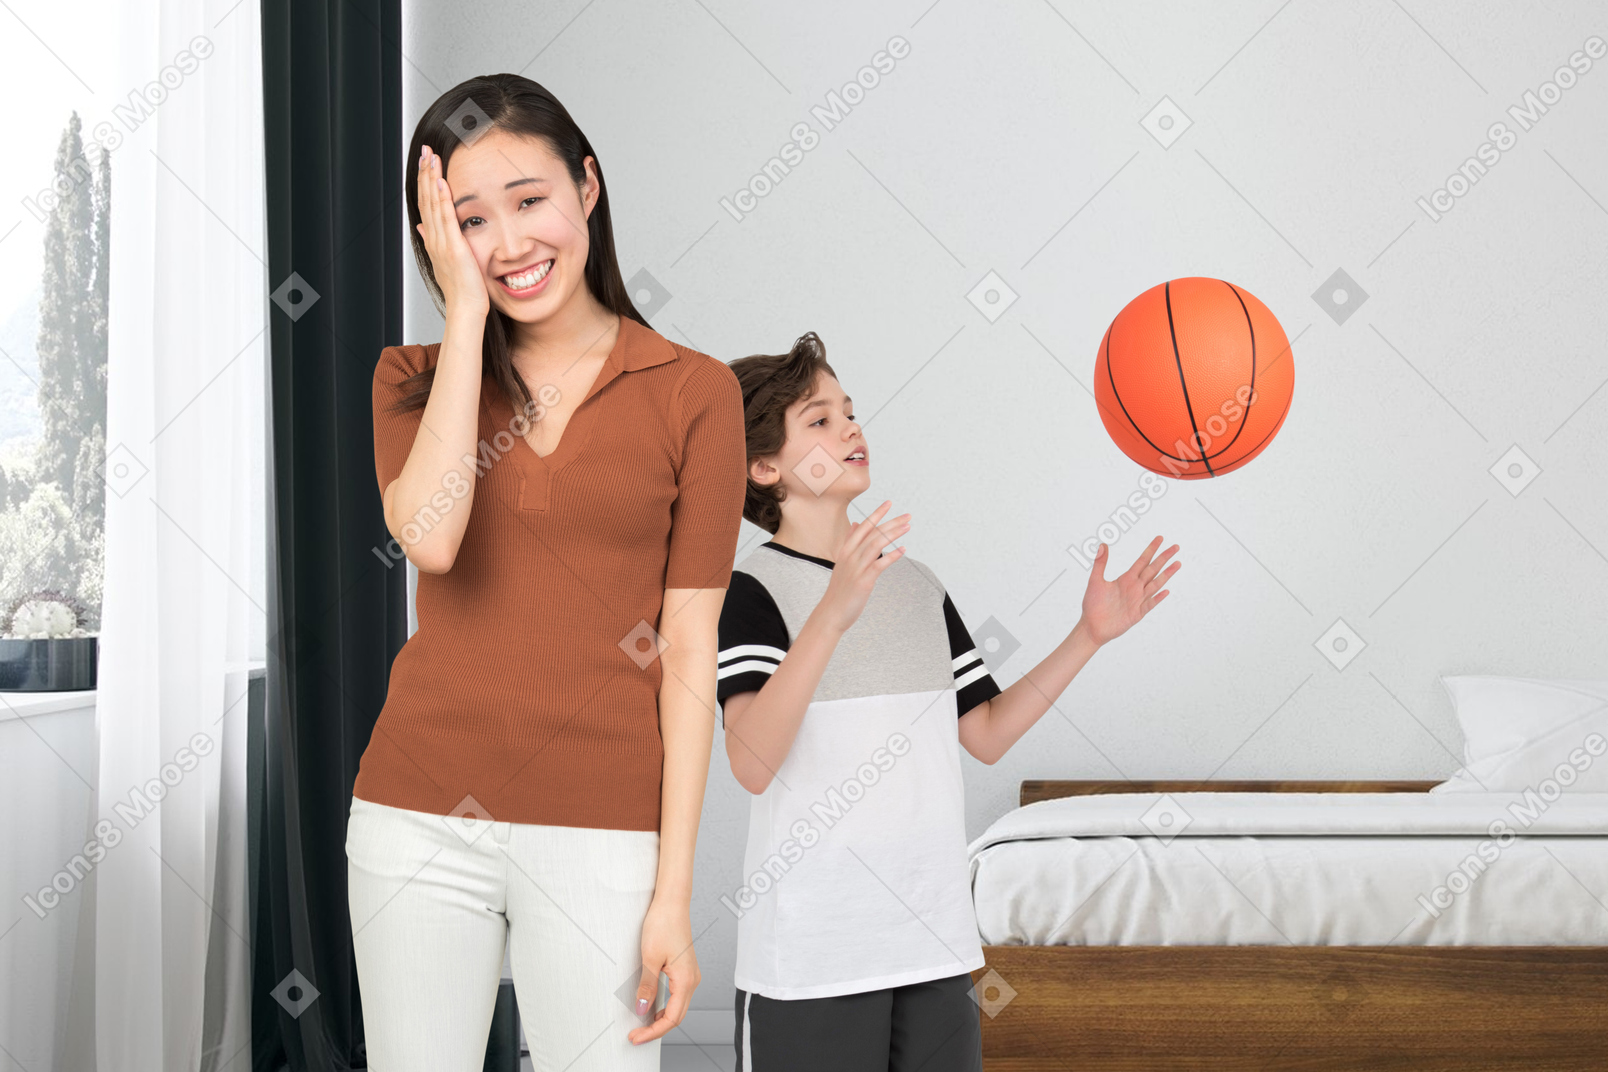 Young woman playing basketball with a man